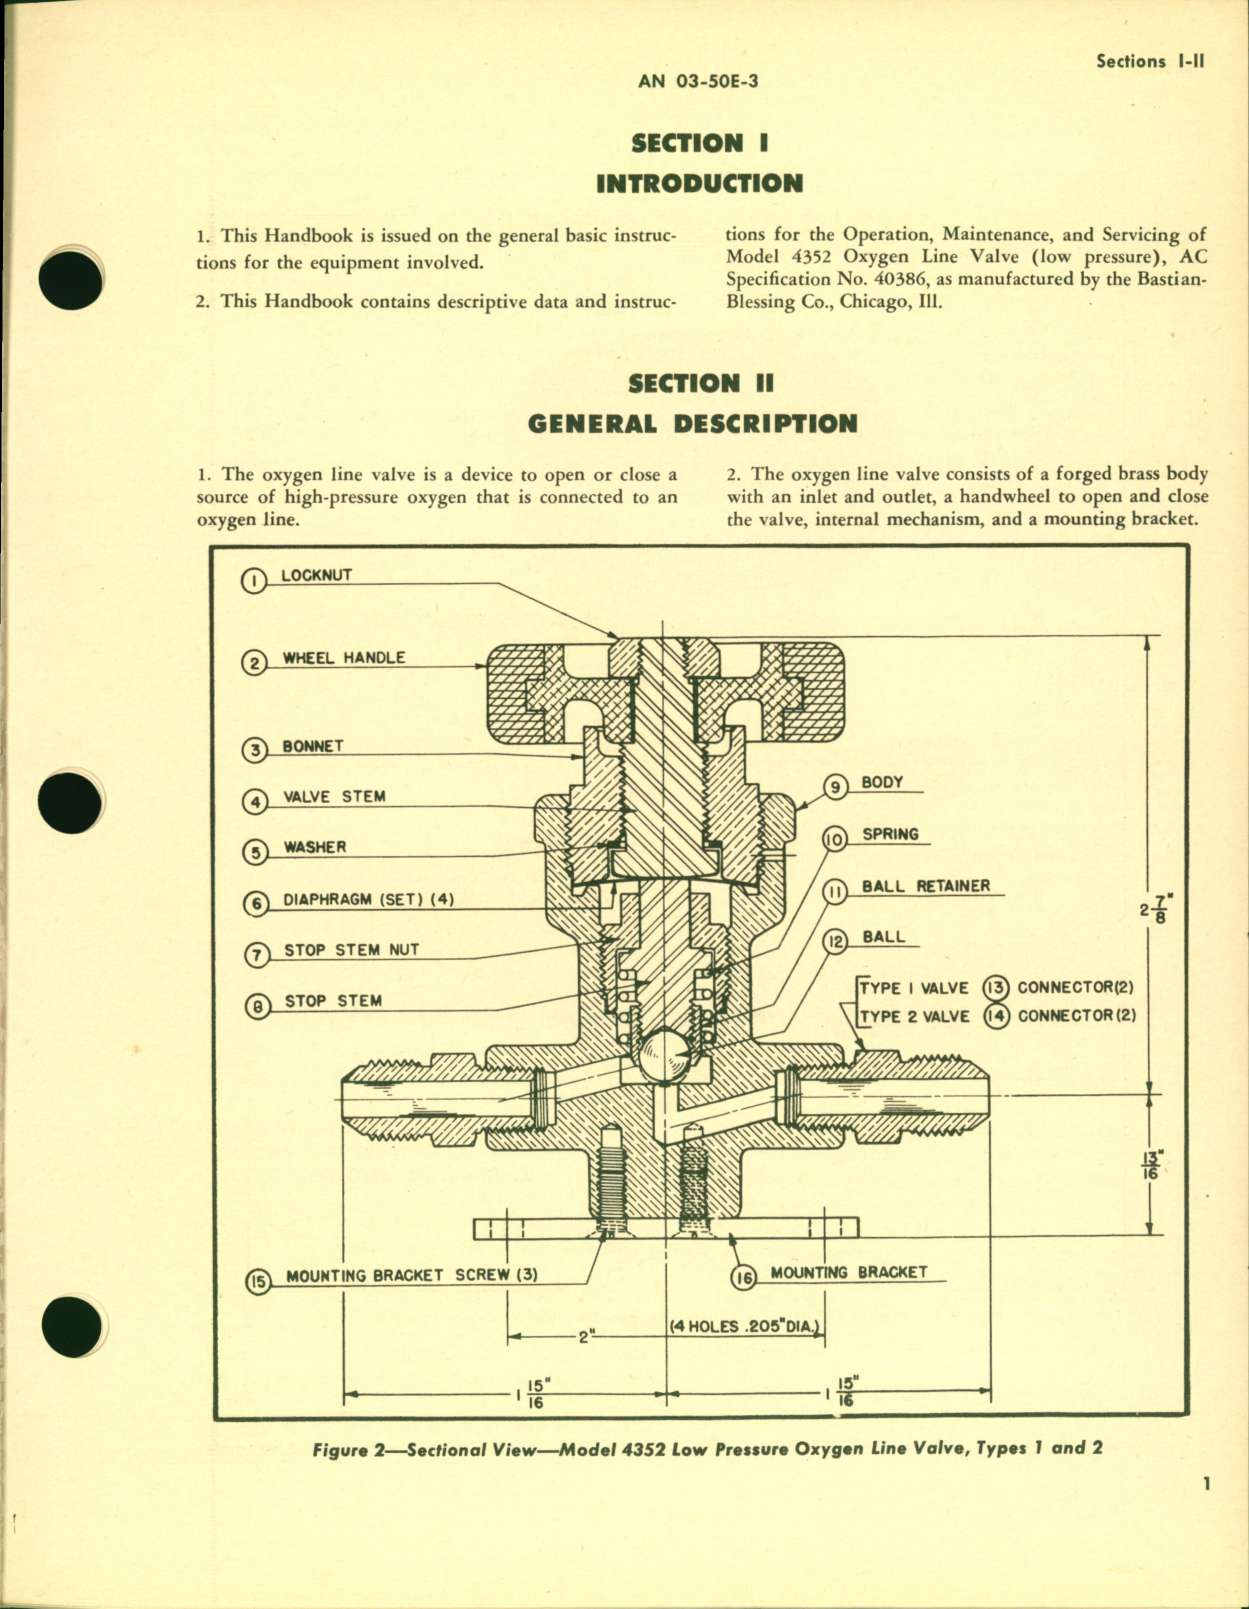 Sample page 5 from AirCorps Library document: Handbook of Instructions with Parts Catalog for Oxygen Line Valves Model 4352 Low Pressure